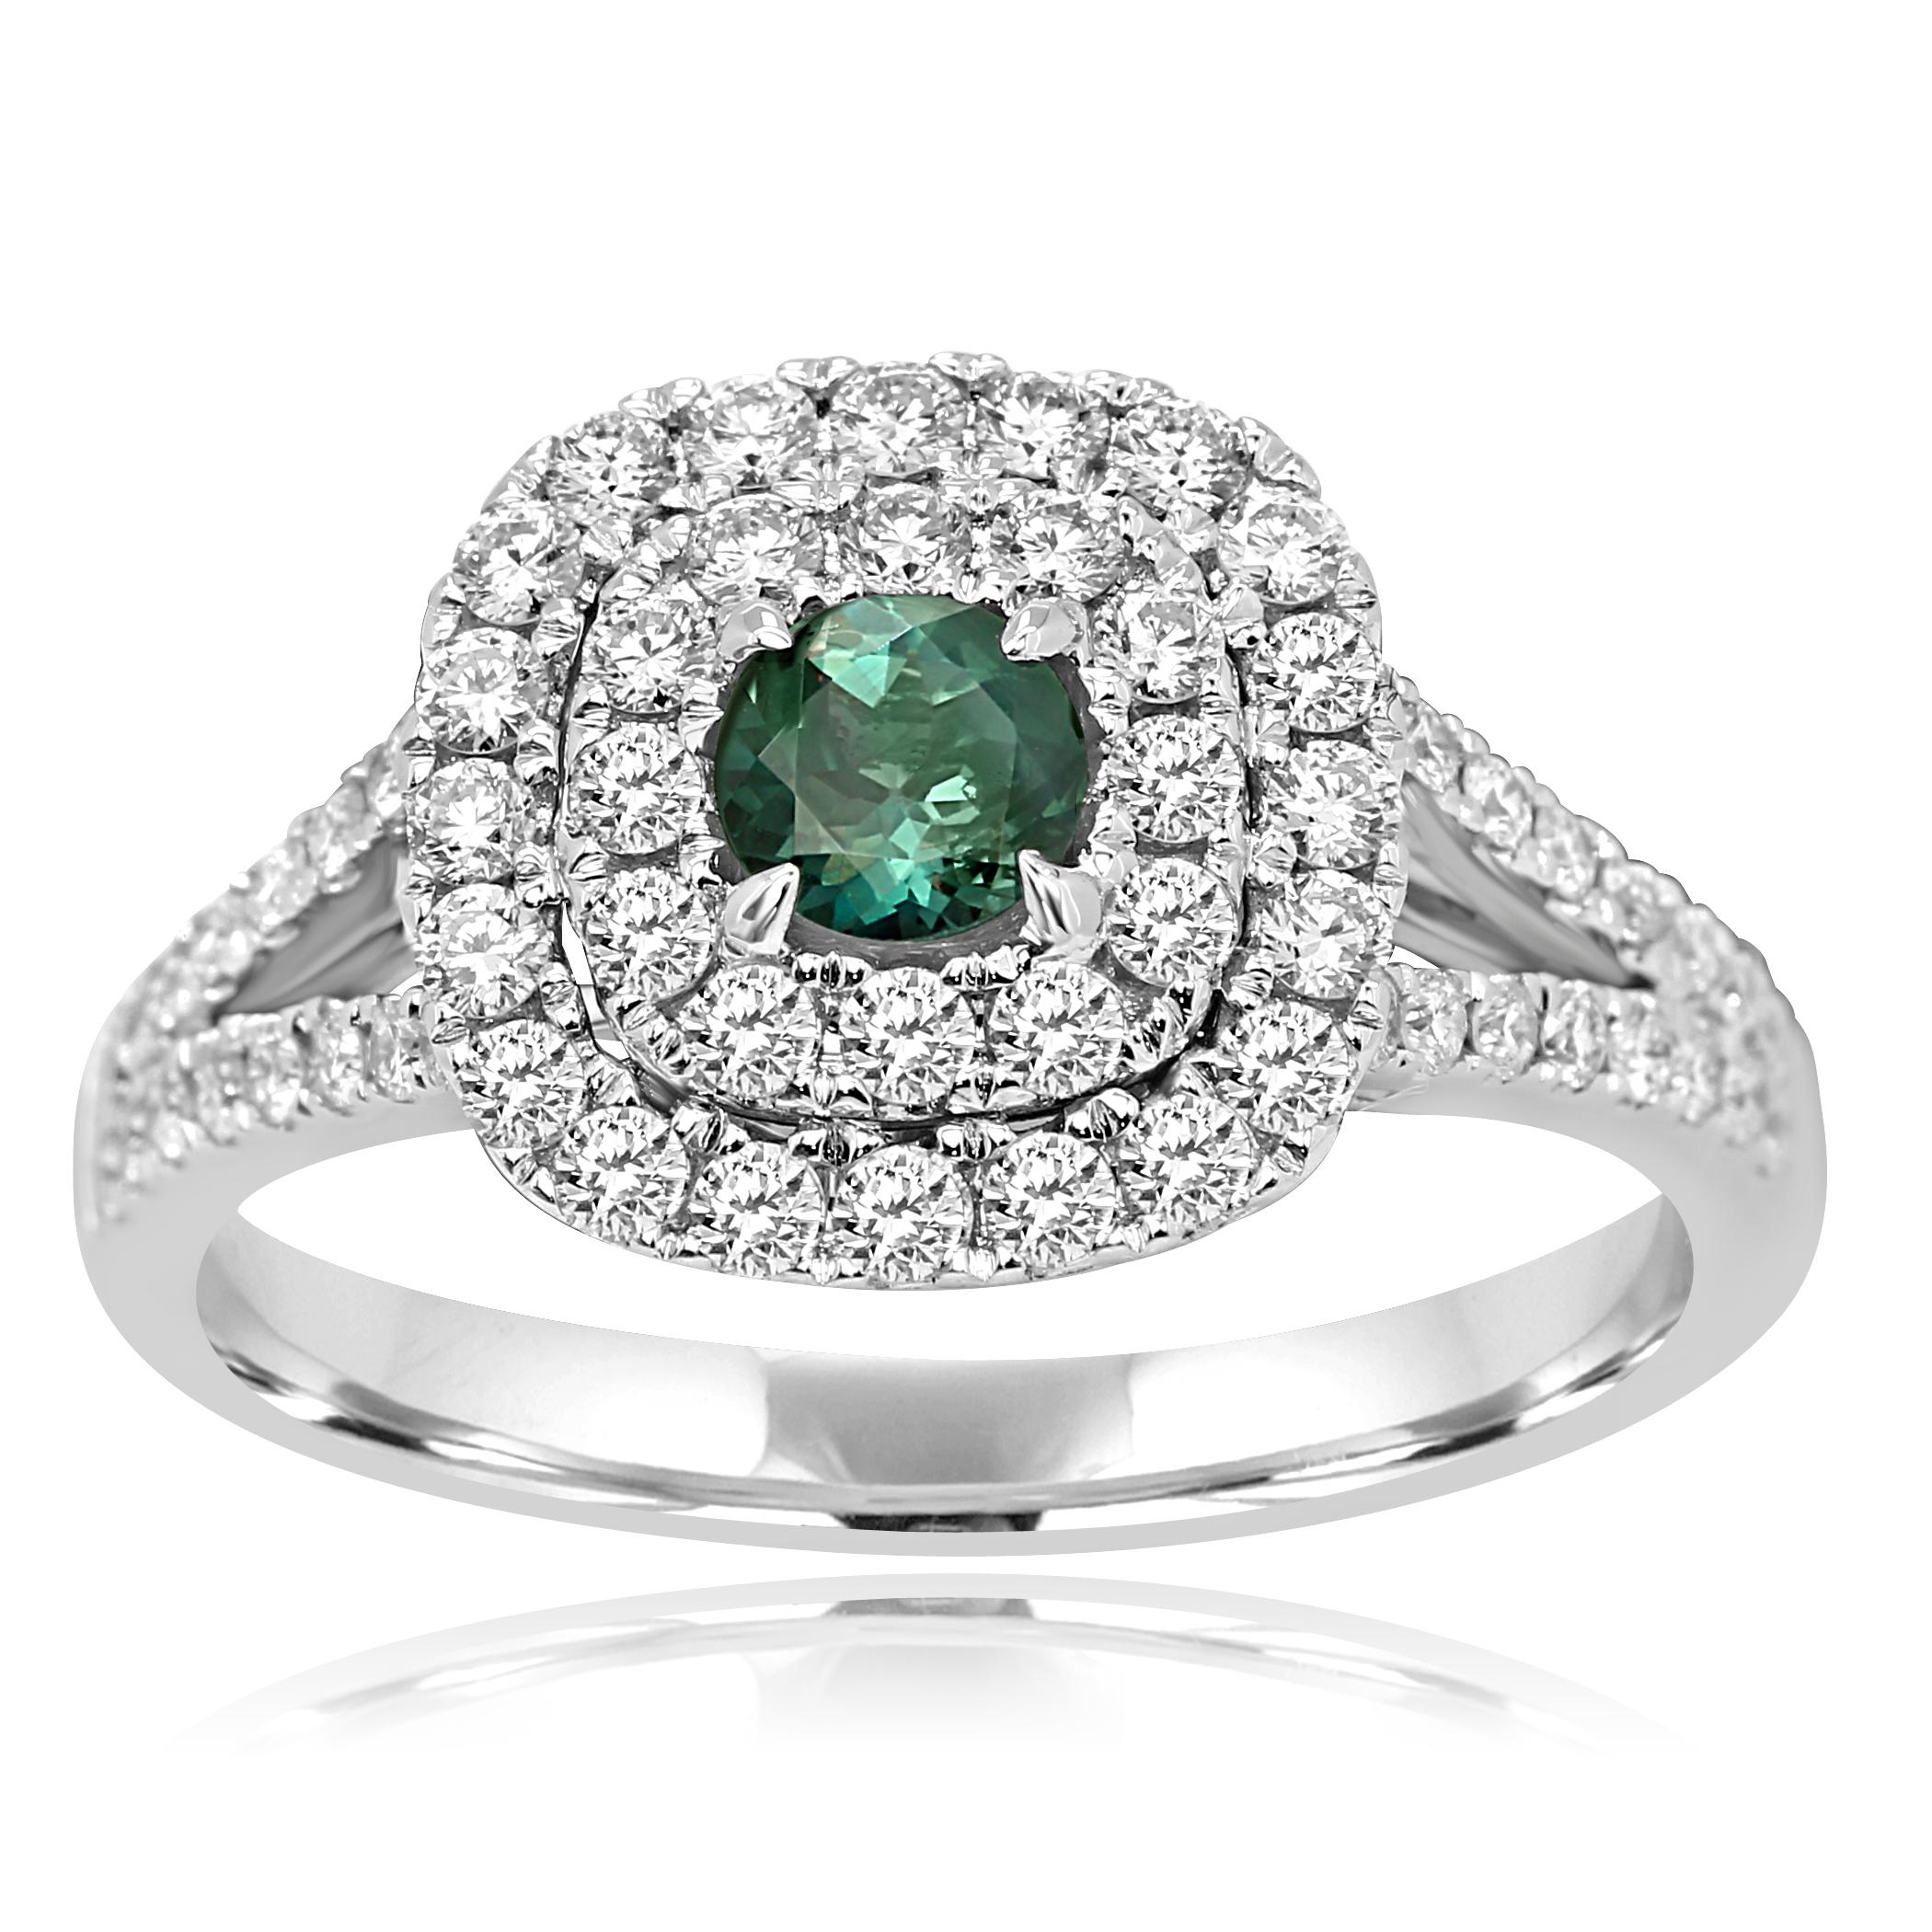 Alexandrite Round 0.33 Carat Encircled in Double Halo of White Round Diamonds 0.65 Carat in 14K White Gold Split Shank Stunning Bridal as well as Fashion Ring.

Style available in different price ranges. Prices are based on your selection of 4C's